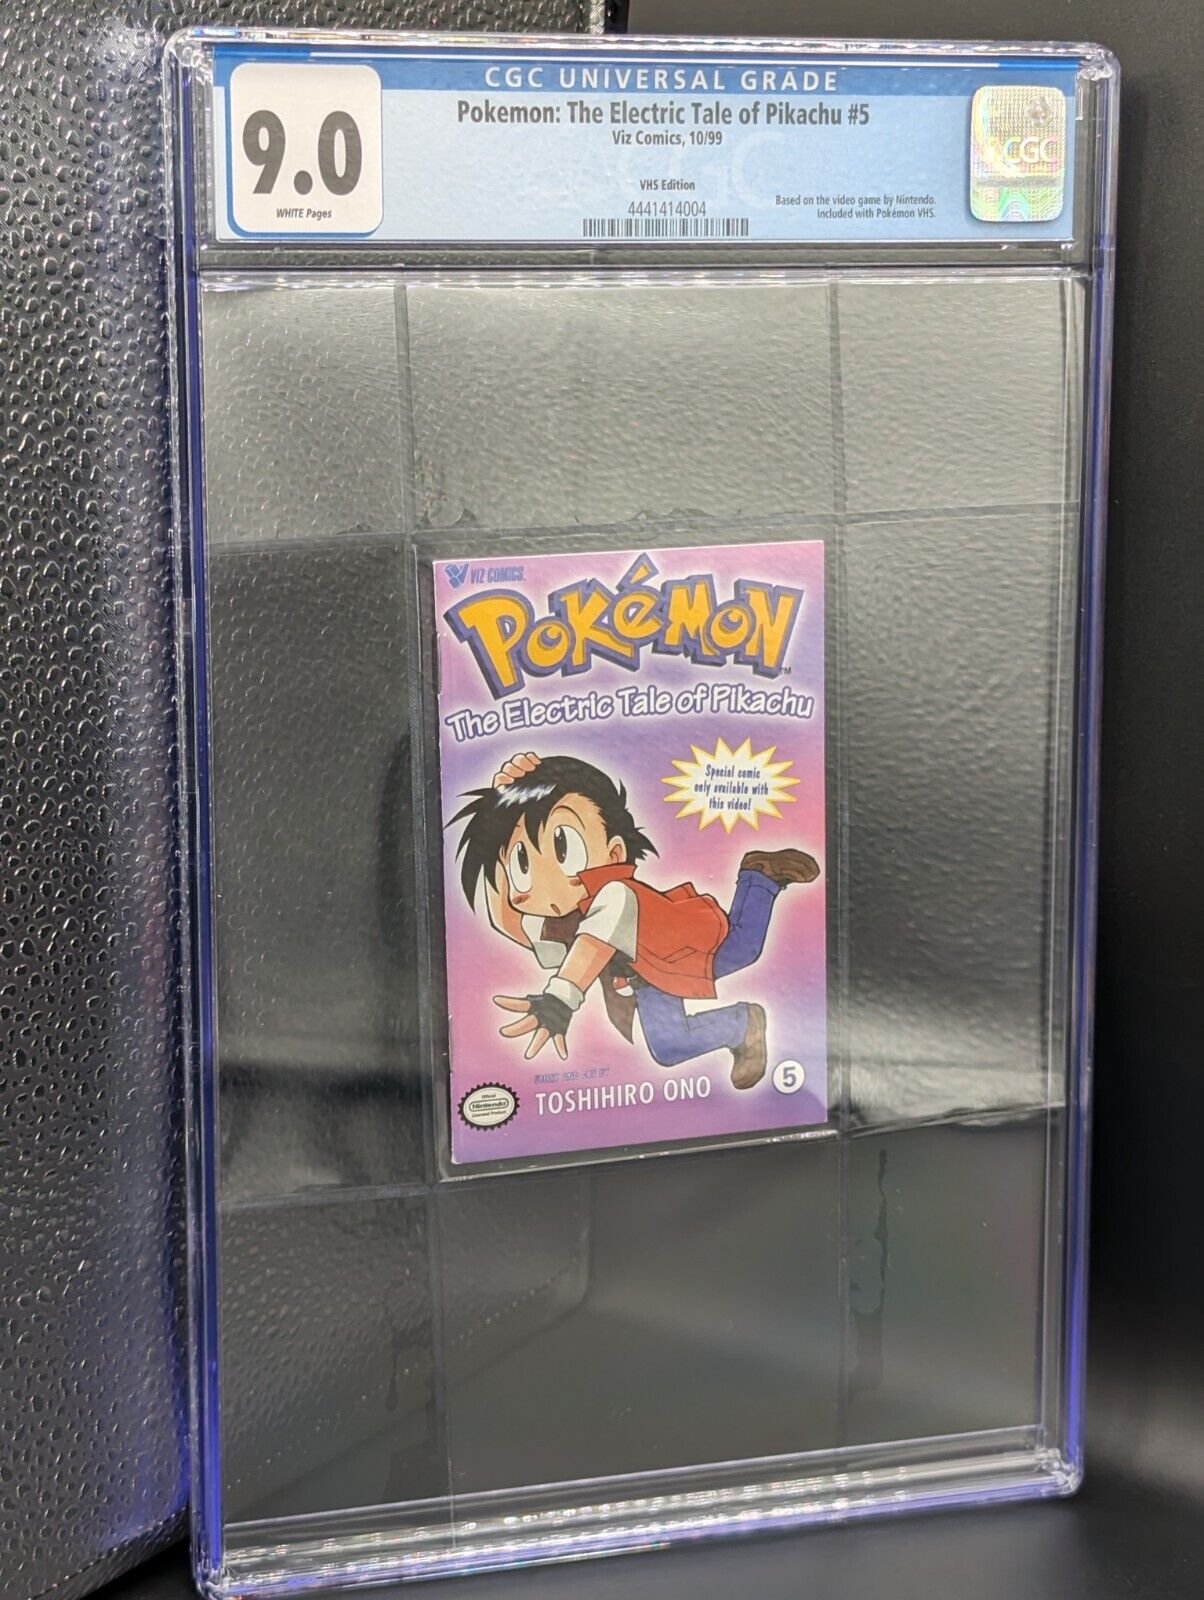 Vintage Pokemon The Electric Tale of Pikachu #5 VHS Edition Mini CGC Graded 9.0